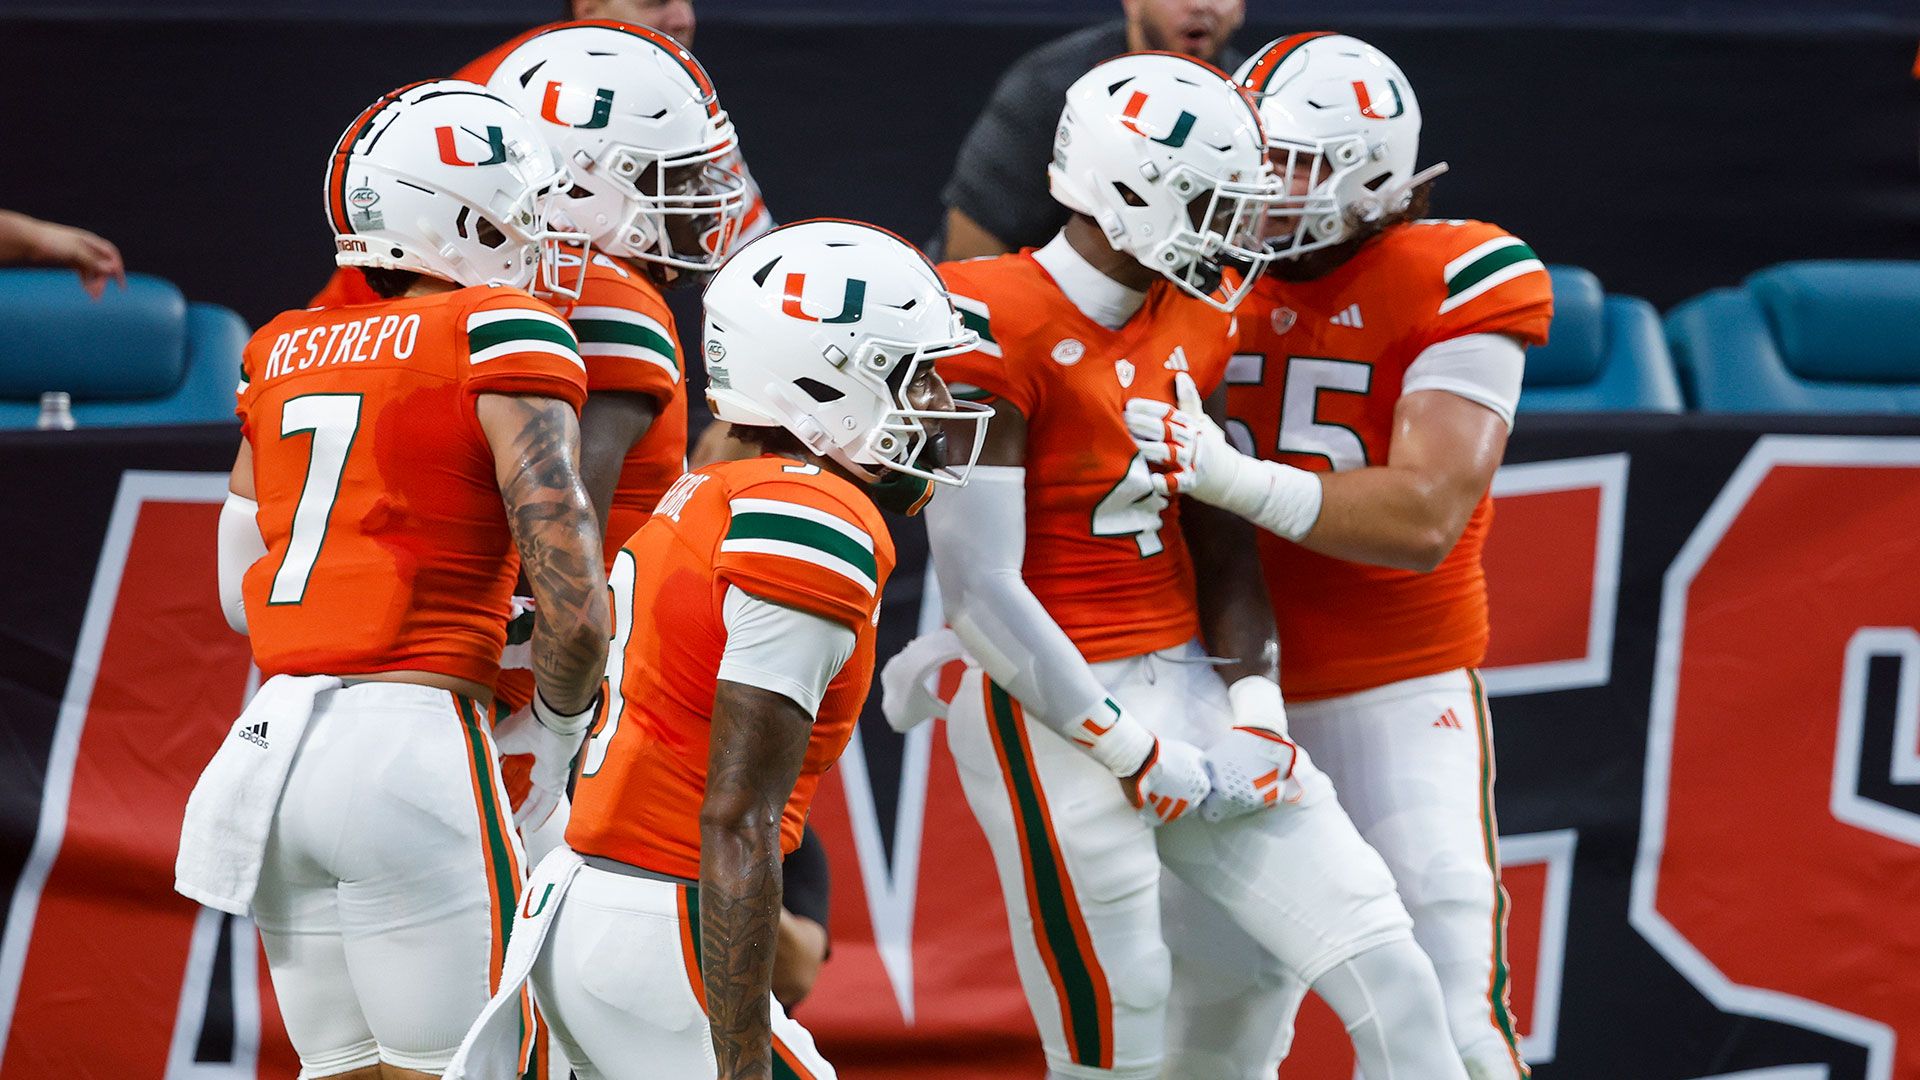 Canes Rewind: A Look Back at the Win over Miami (OH)